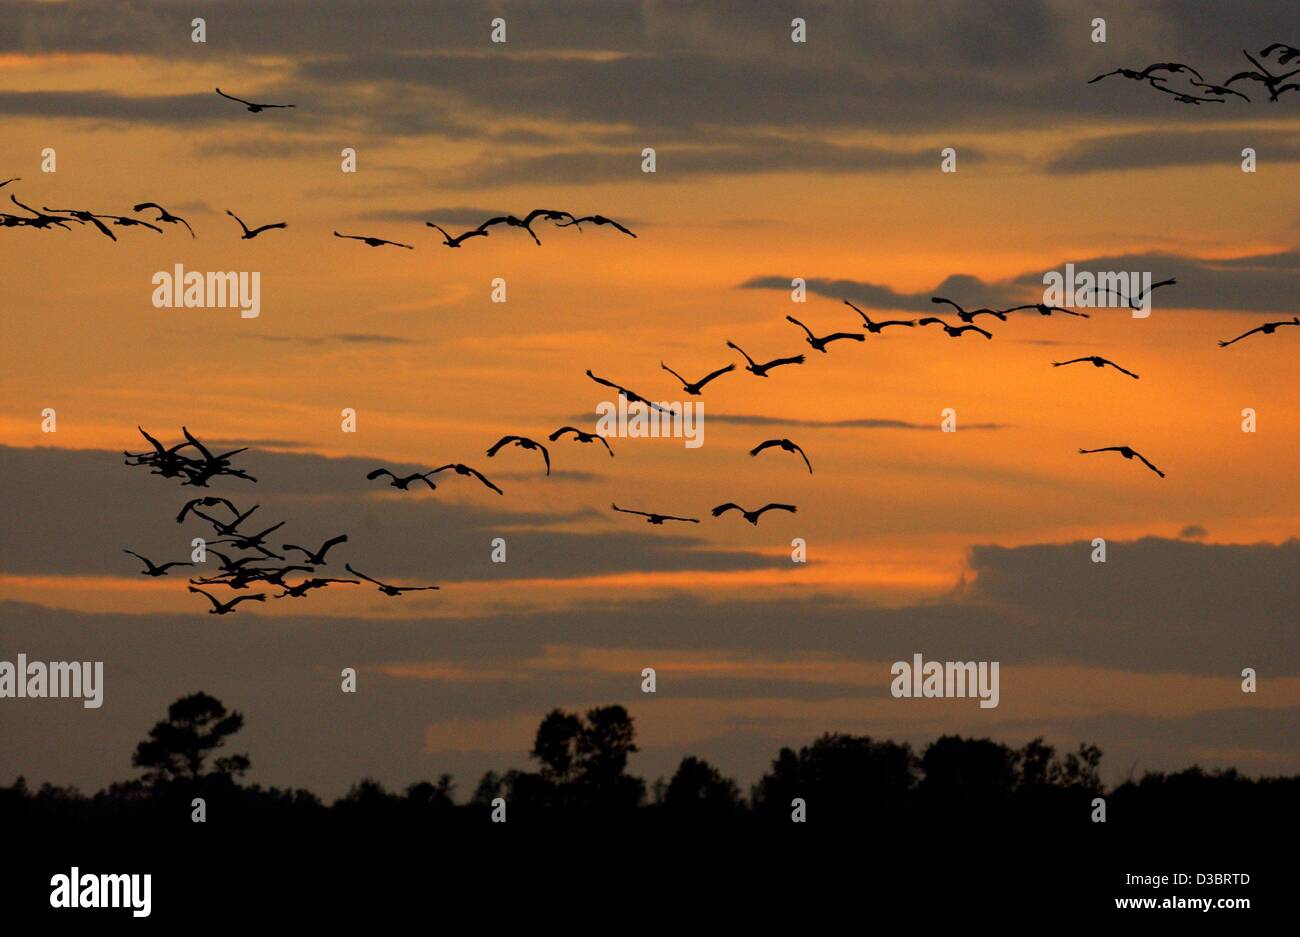 (dpa) - Cranes fly in front of a red sky, near Gross Mohrdorf, Germany, 24 September 2003. Every year the cranes fly south to overwinter in warmer countries, such as southern France, Spain or Portugal. Stock Photo